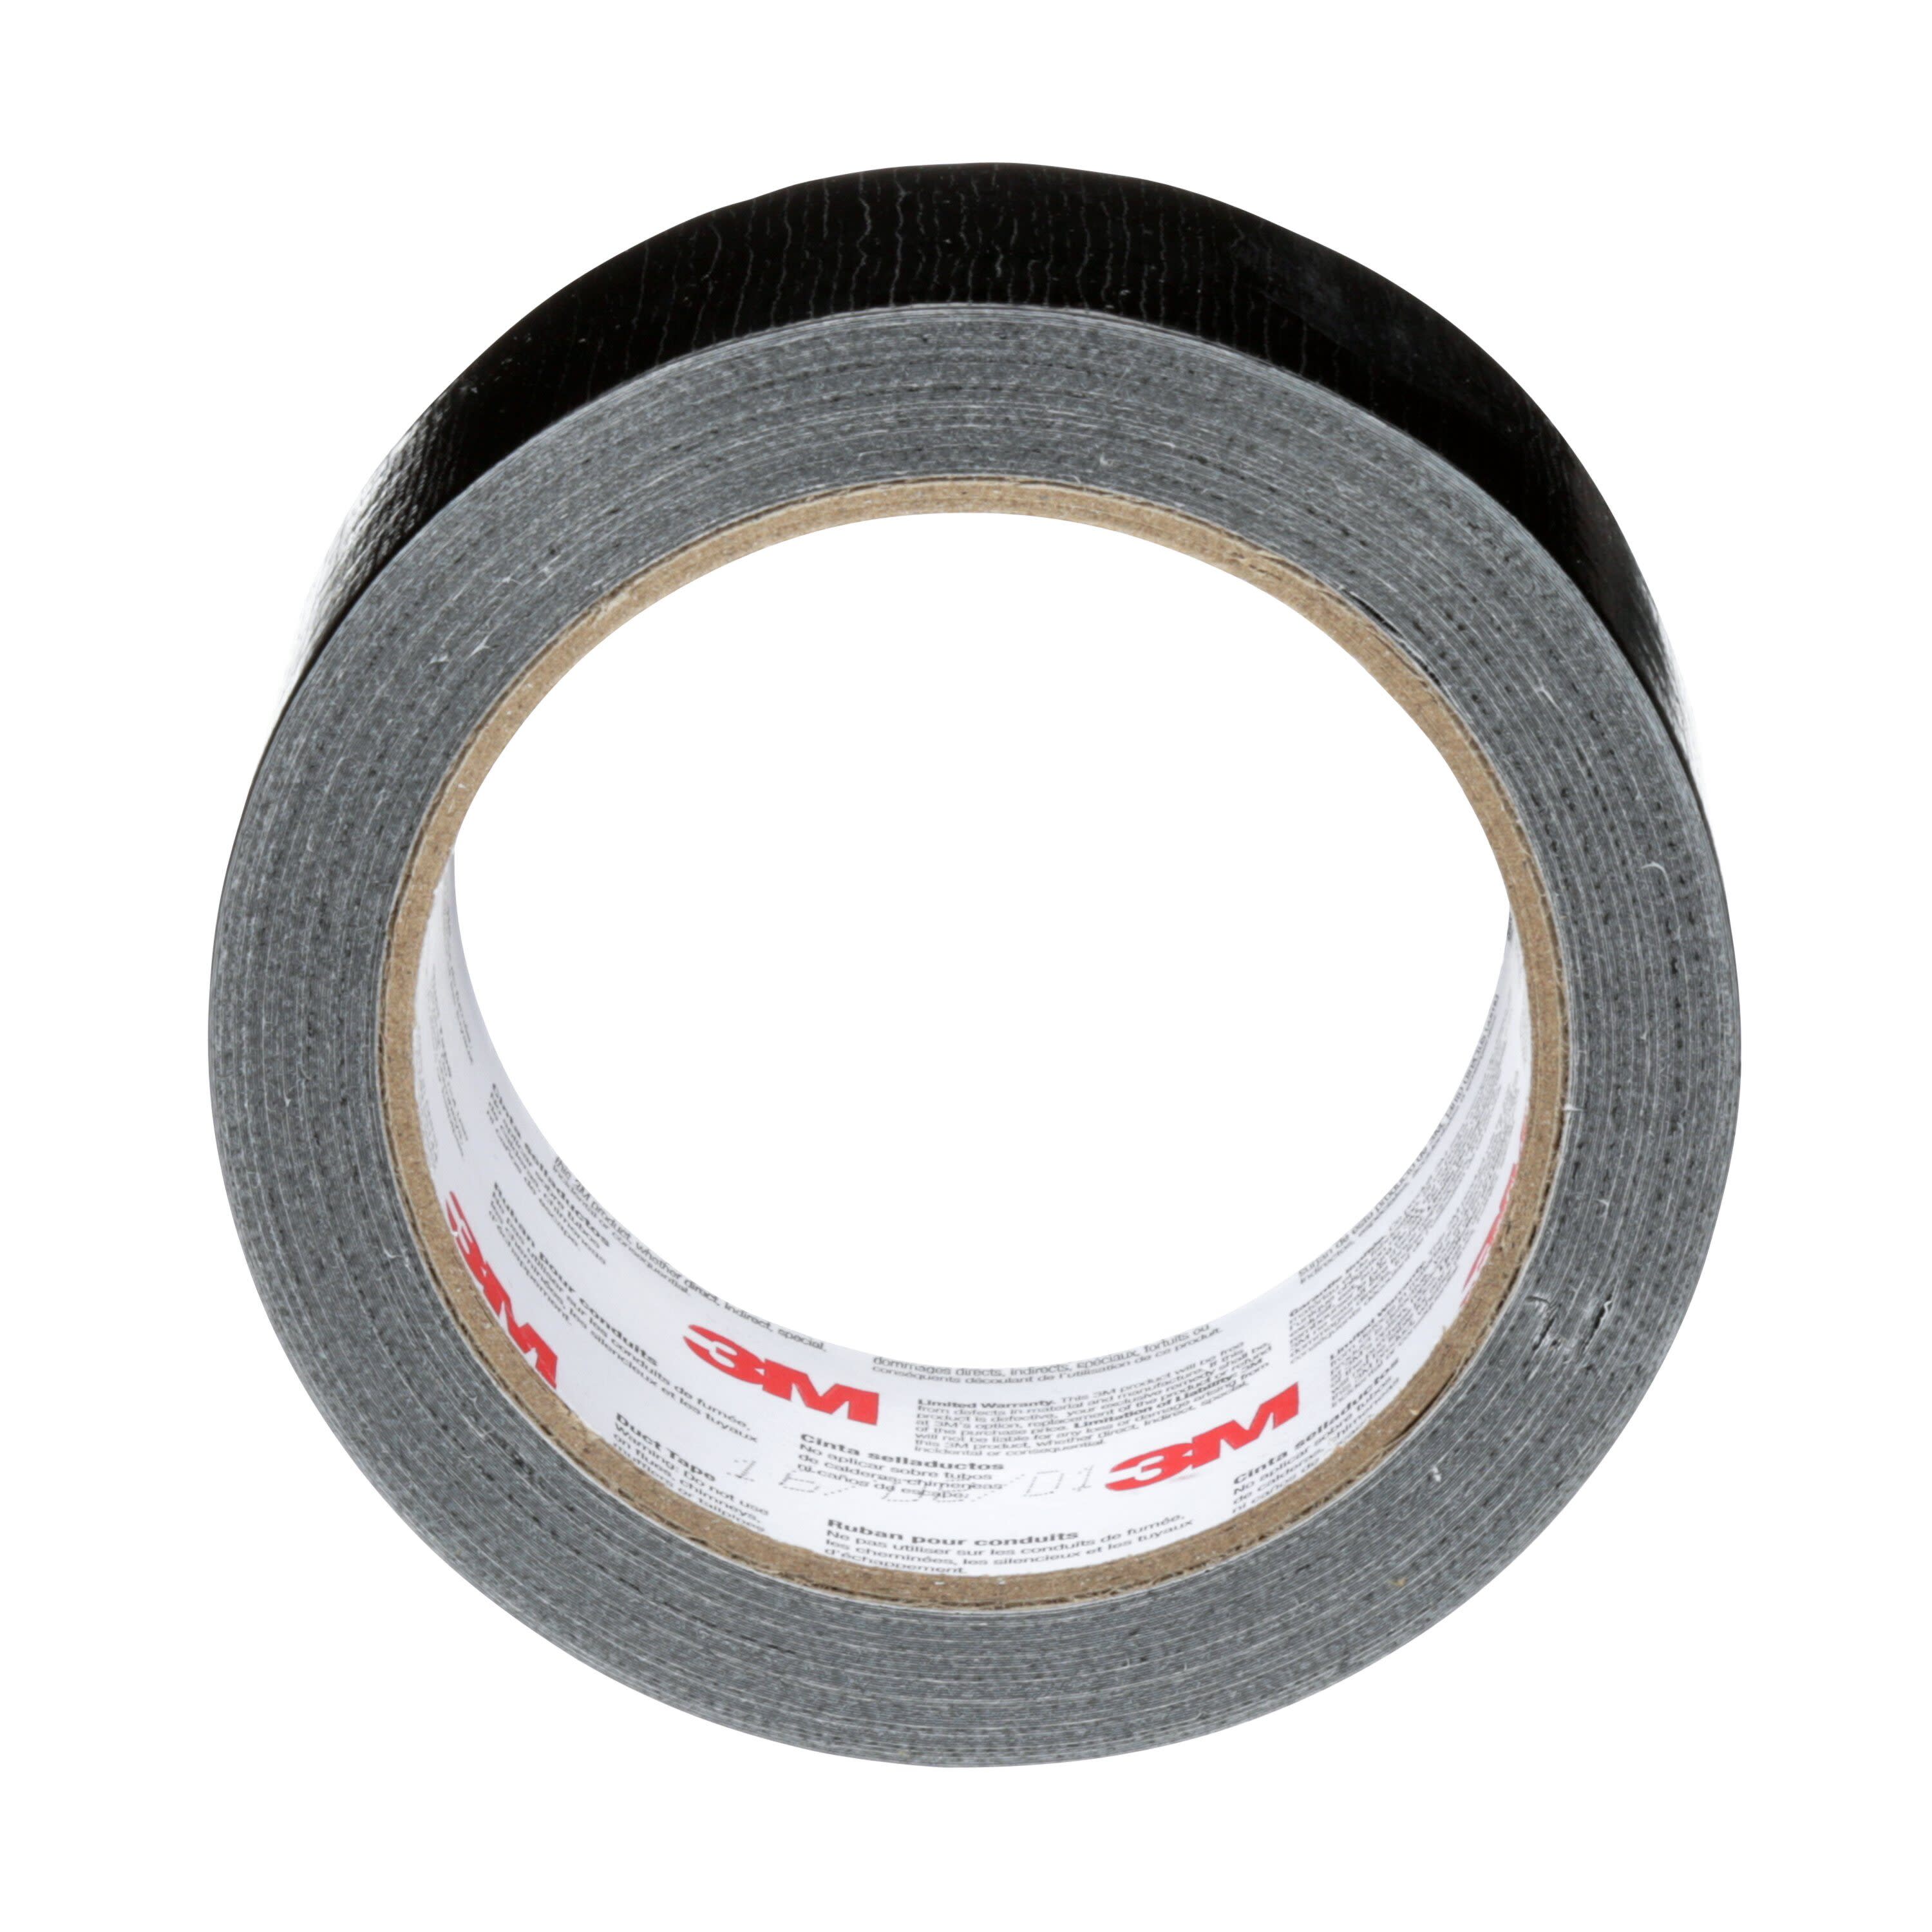  3M 3920-WH Duct Tape, 20 Yards, White : Industrial & Scientific